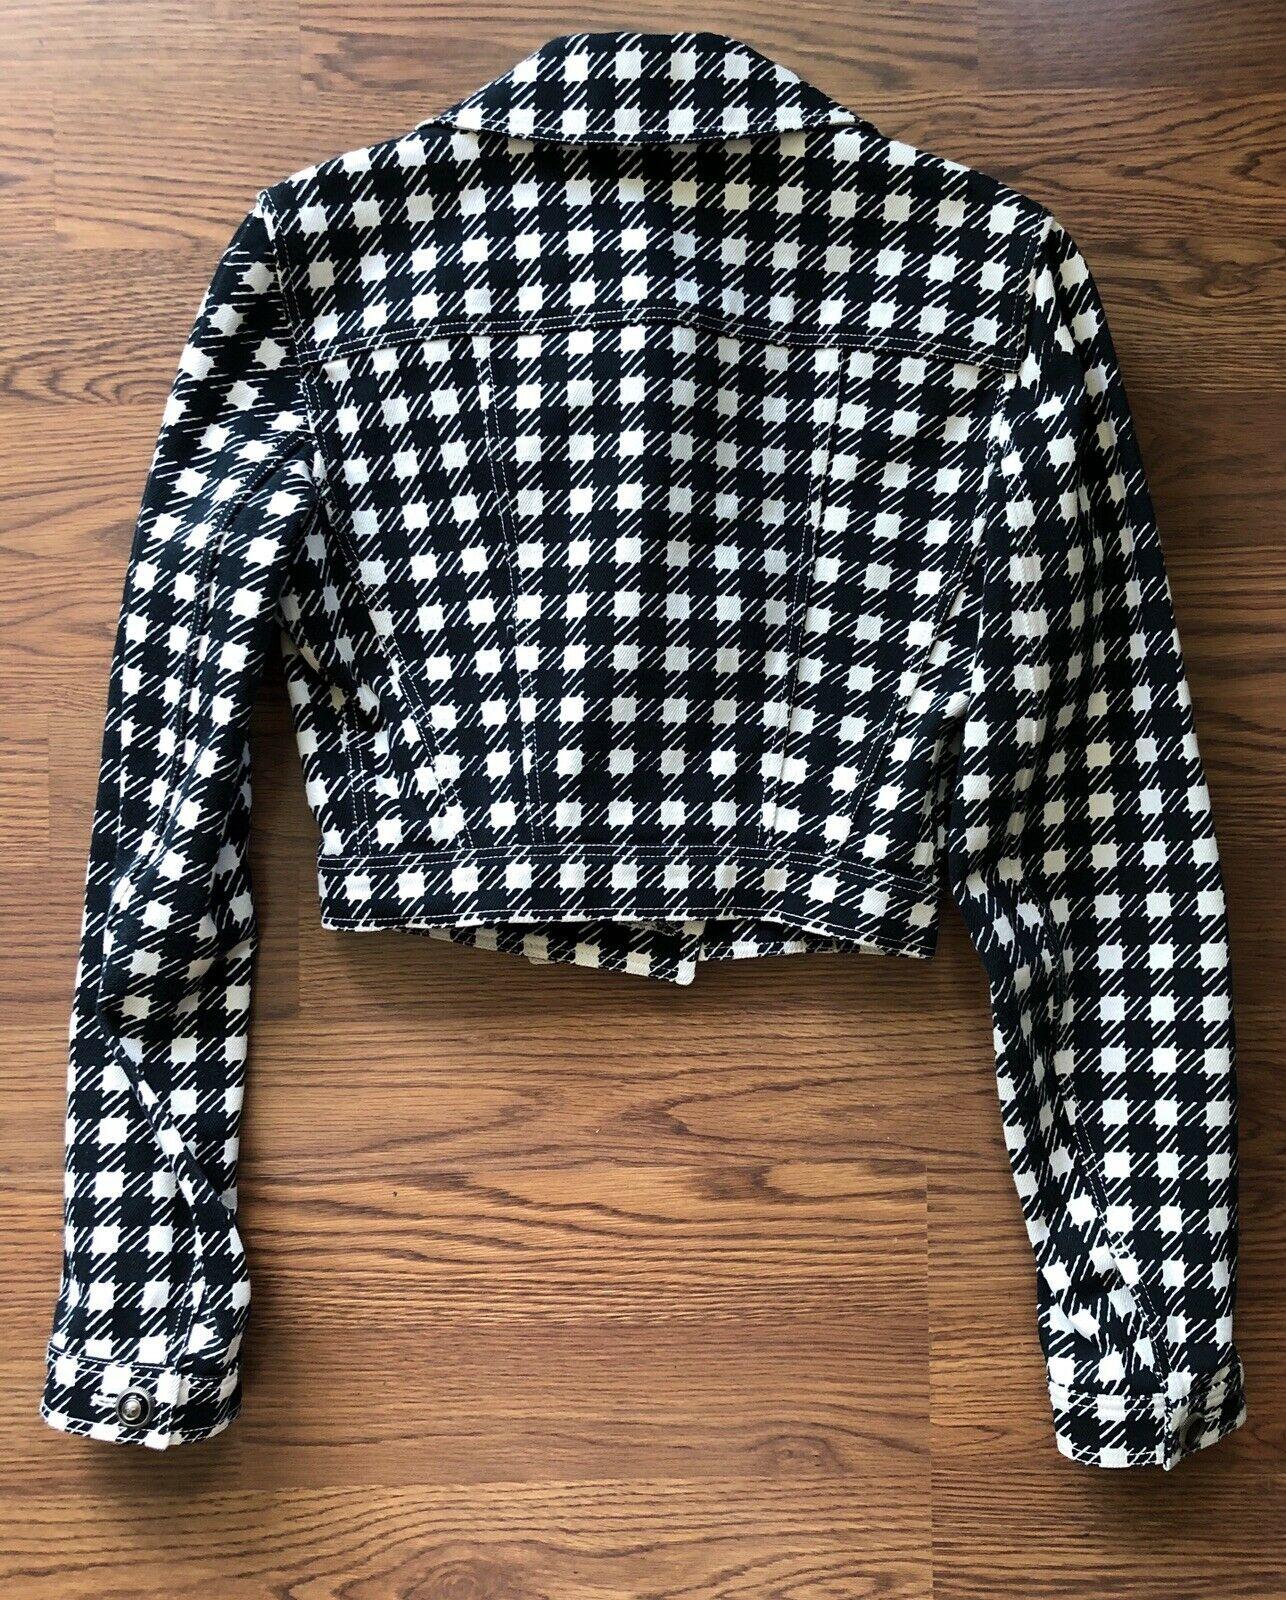 Azzedine Alaia S/S 1991 Vintage Tati Cropped Jacket FR 36

Alaïa cropped jacket with geometric pattern throughout, notched lapels, button accent at cuffs and button closures at front.

Very Good Pre-Owned Condition except missing emblem on the